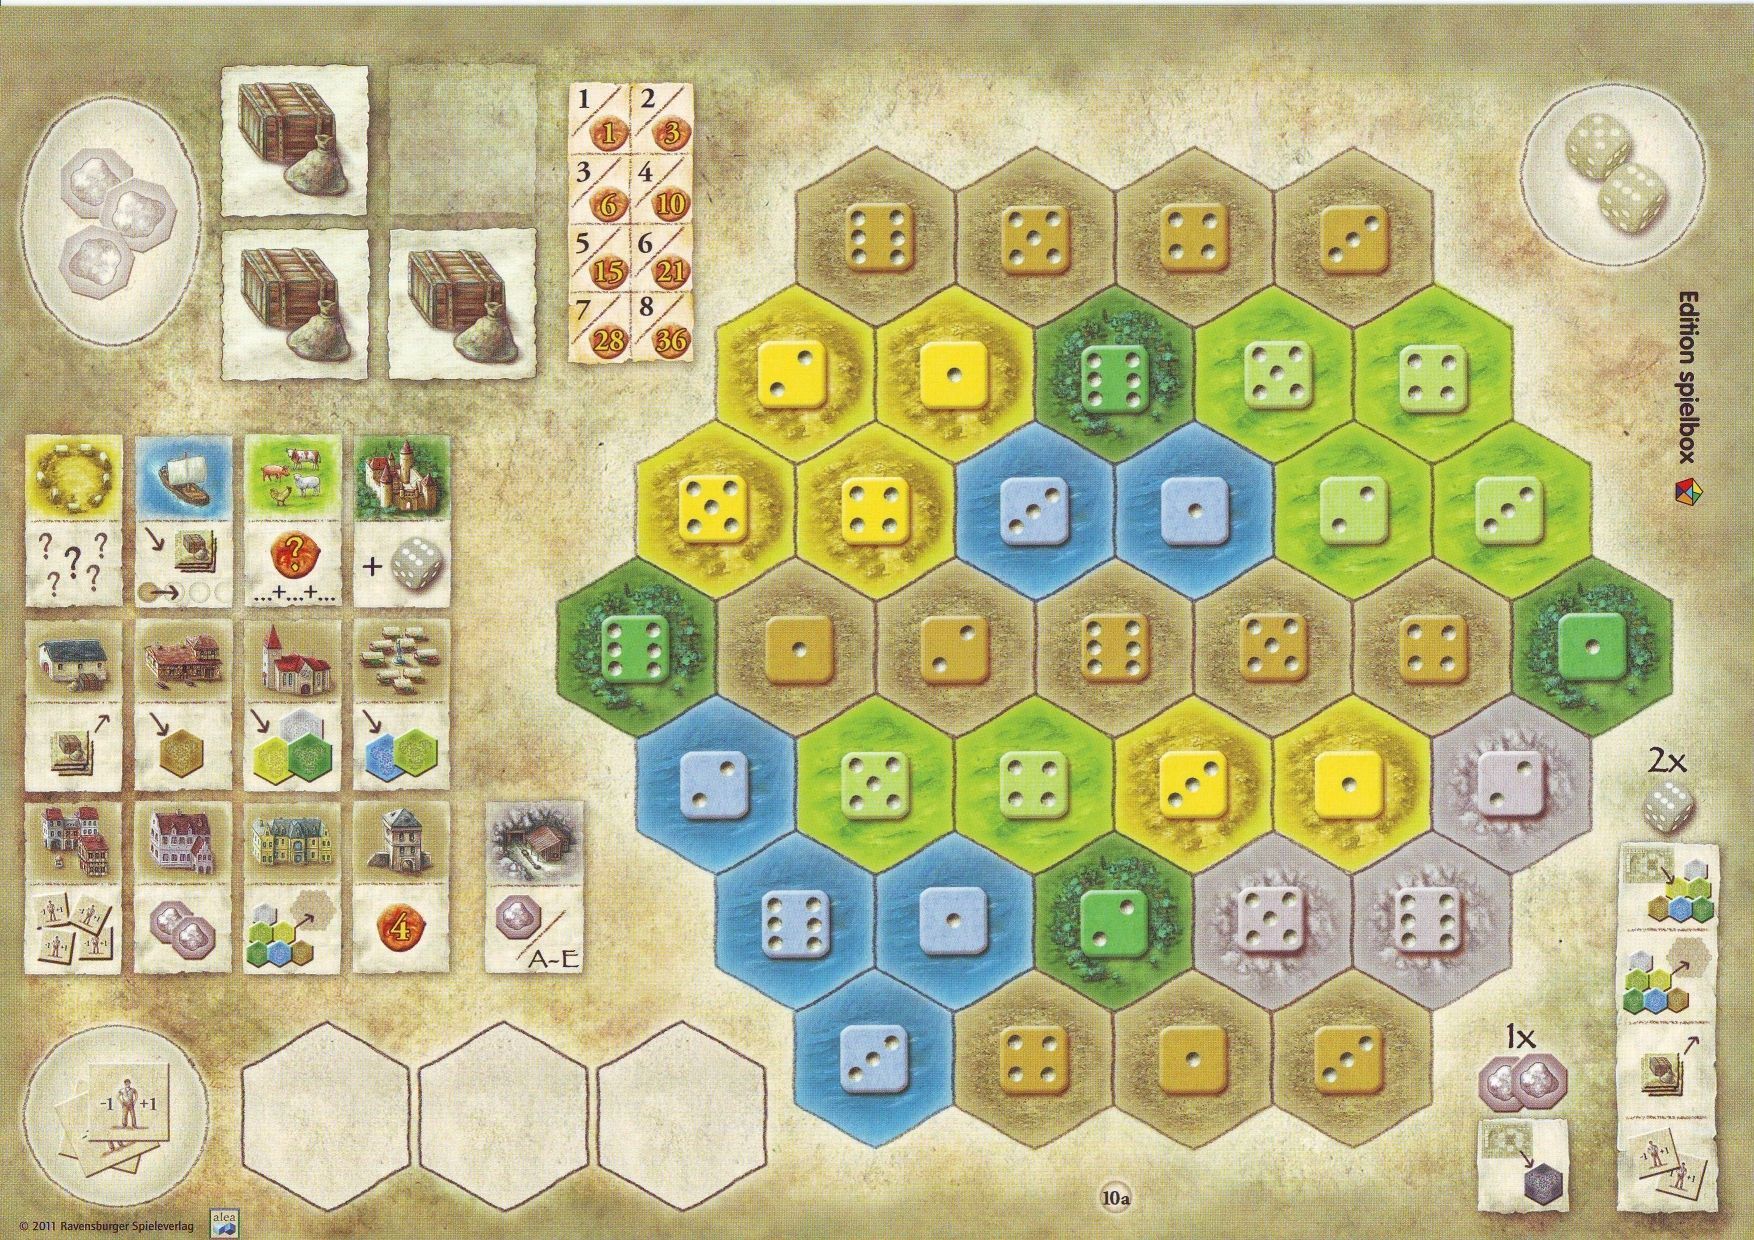 The Castles of Burgundy: 1st Expansion – New Player Boards